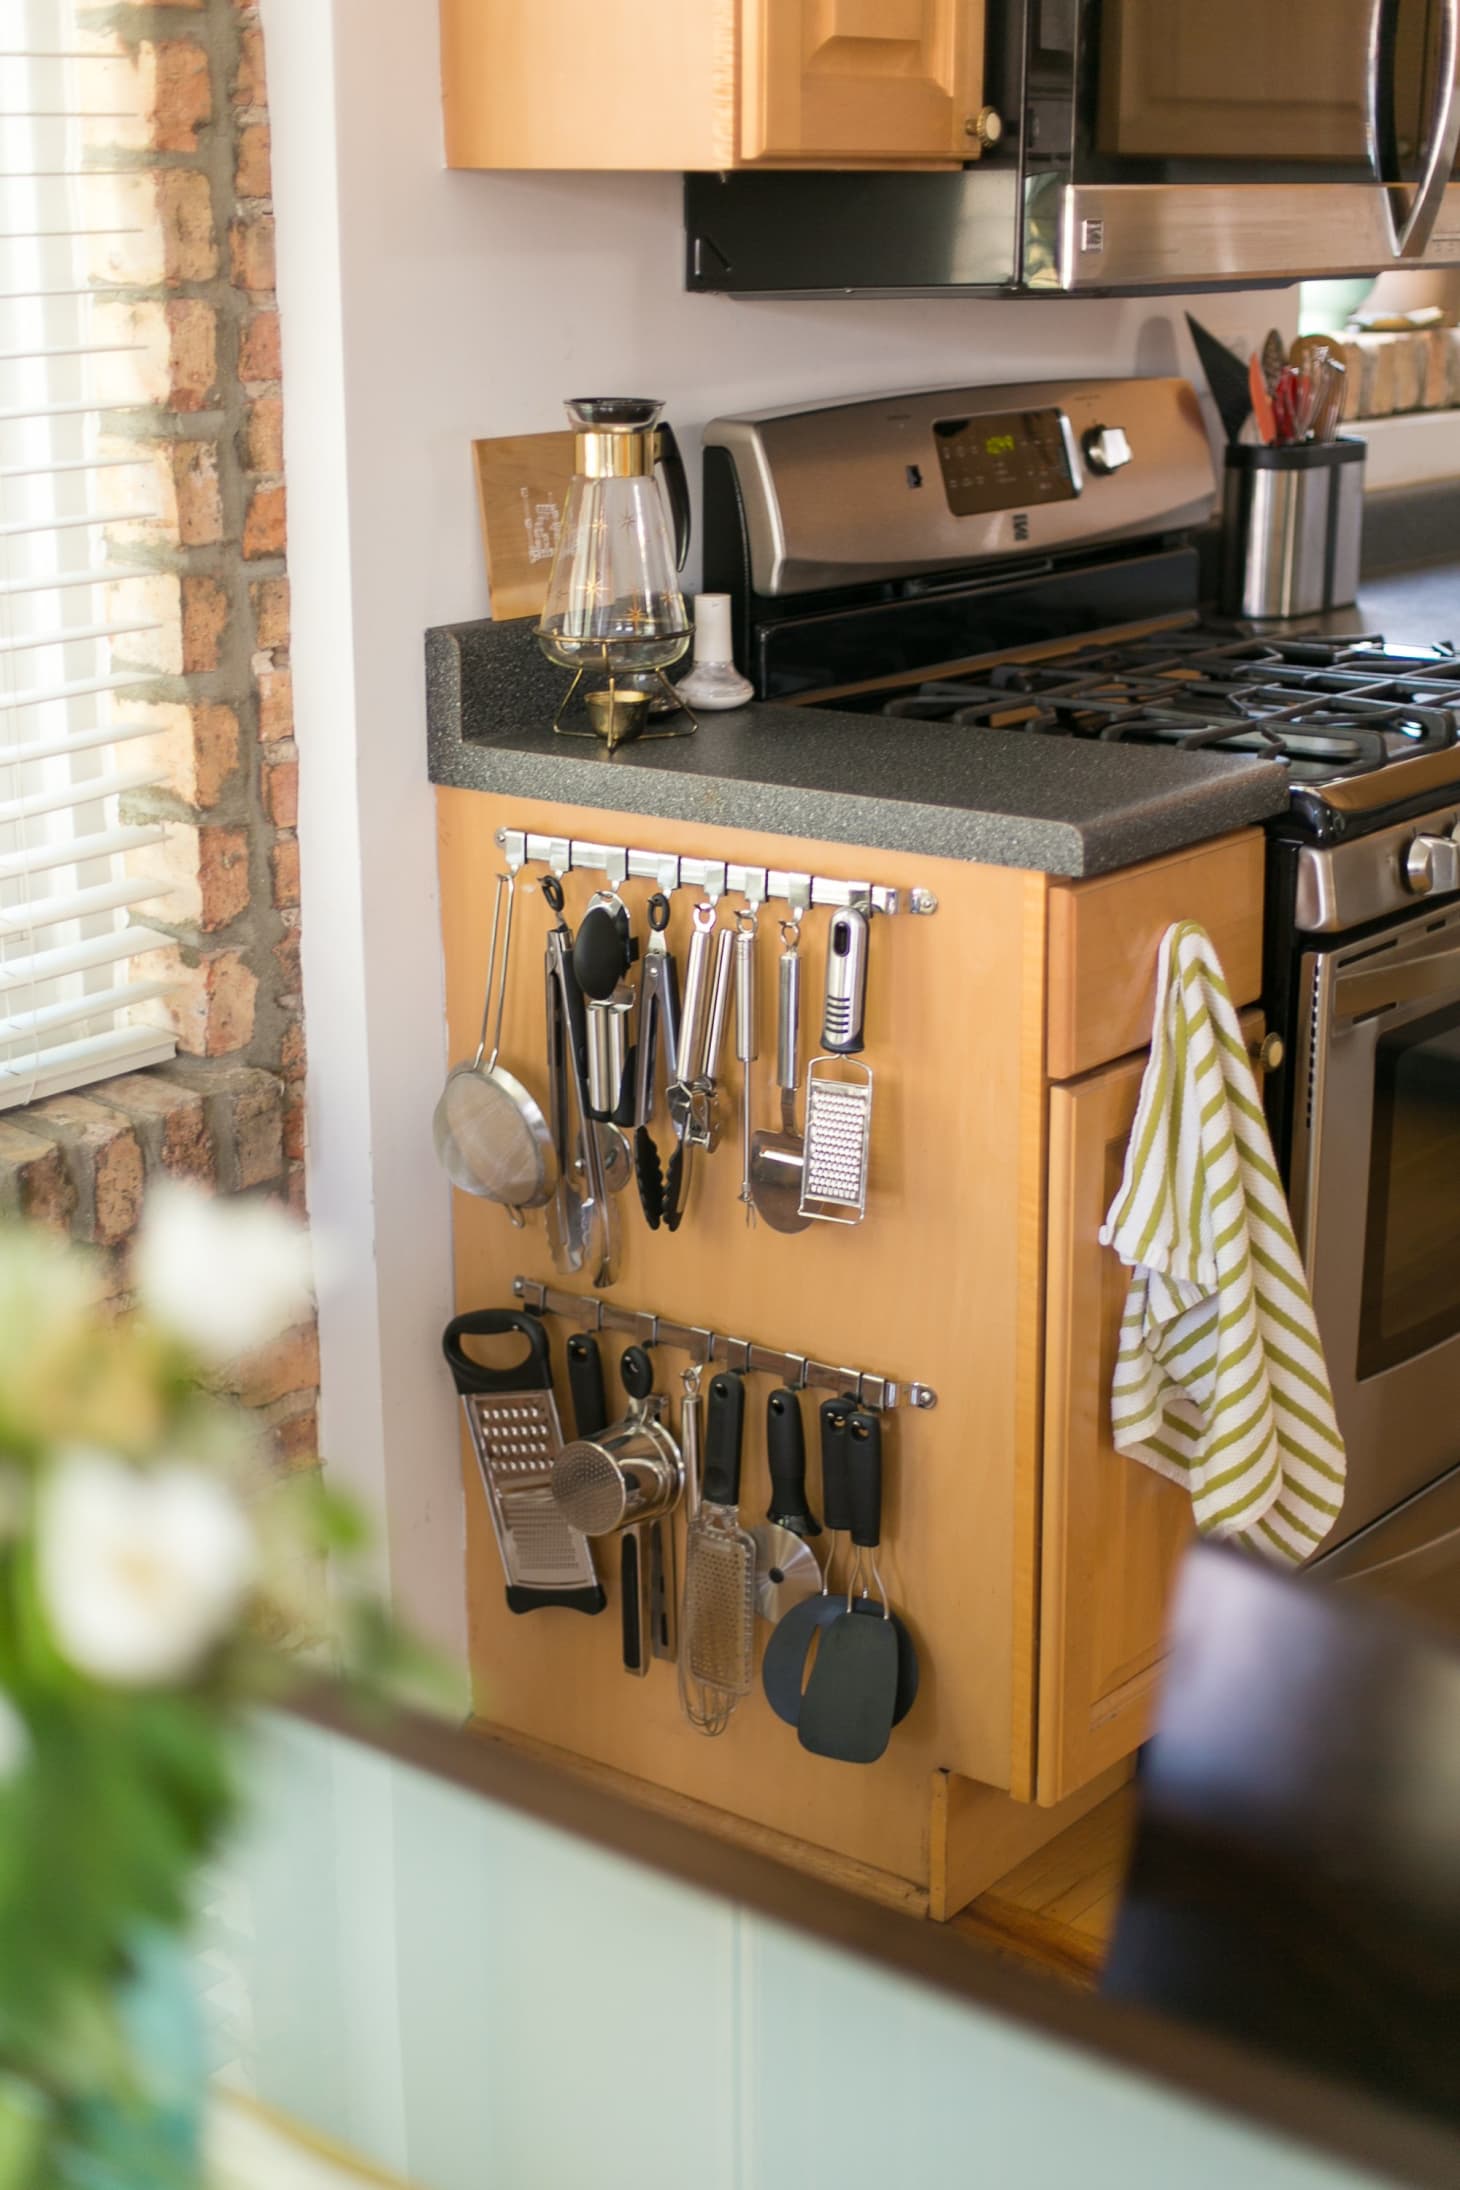 The 21 Best Storage Ideas for Small Kitchens | Kitchn